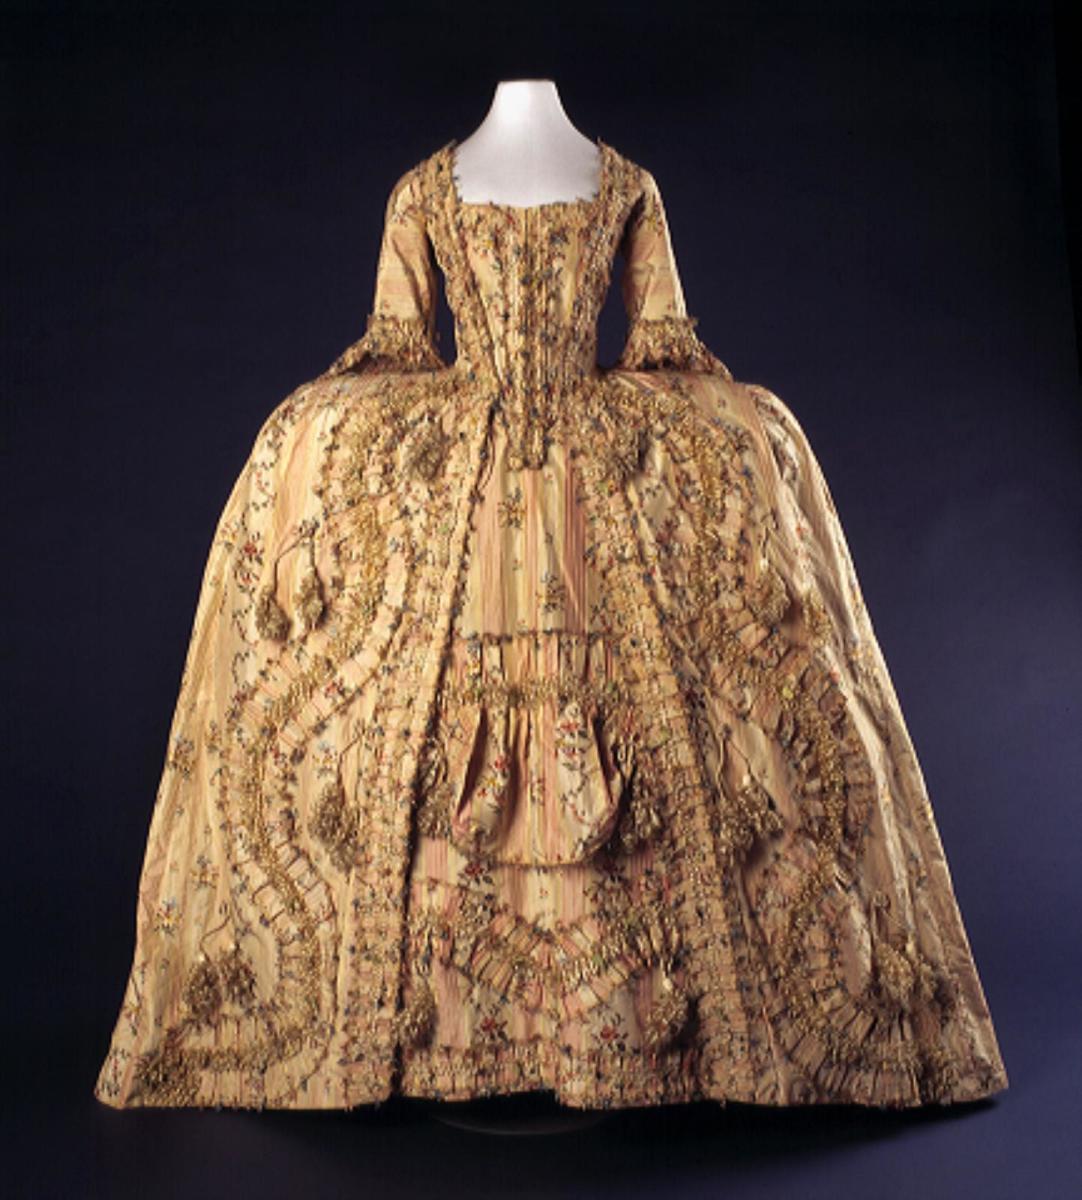 The robe à la Francaise (1740-1760) featured an open front and panniers.